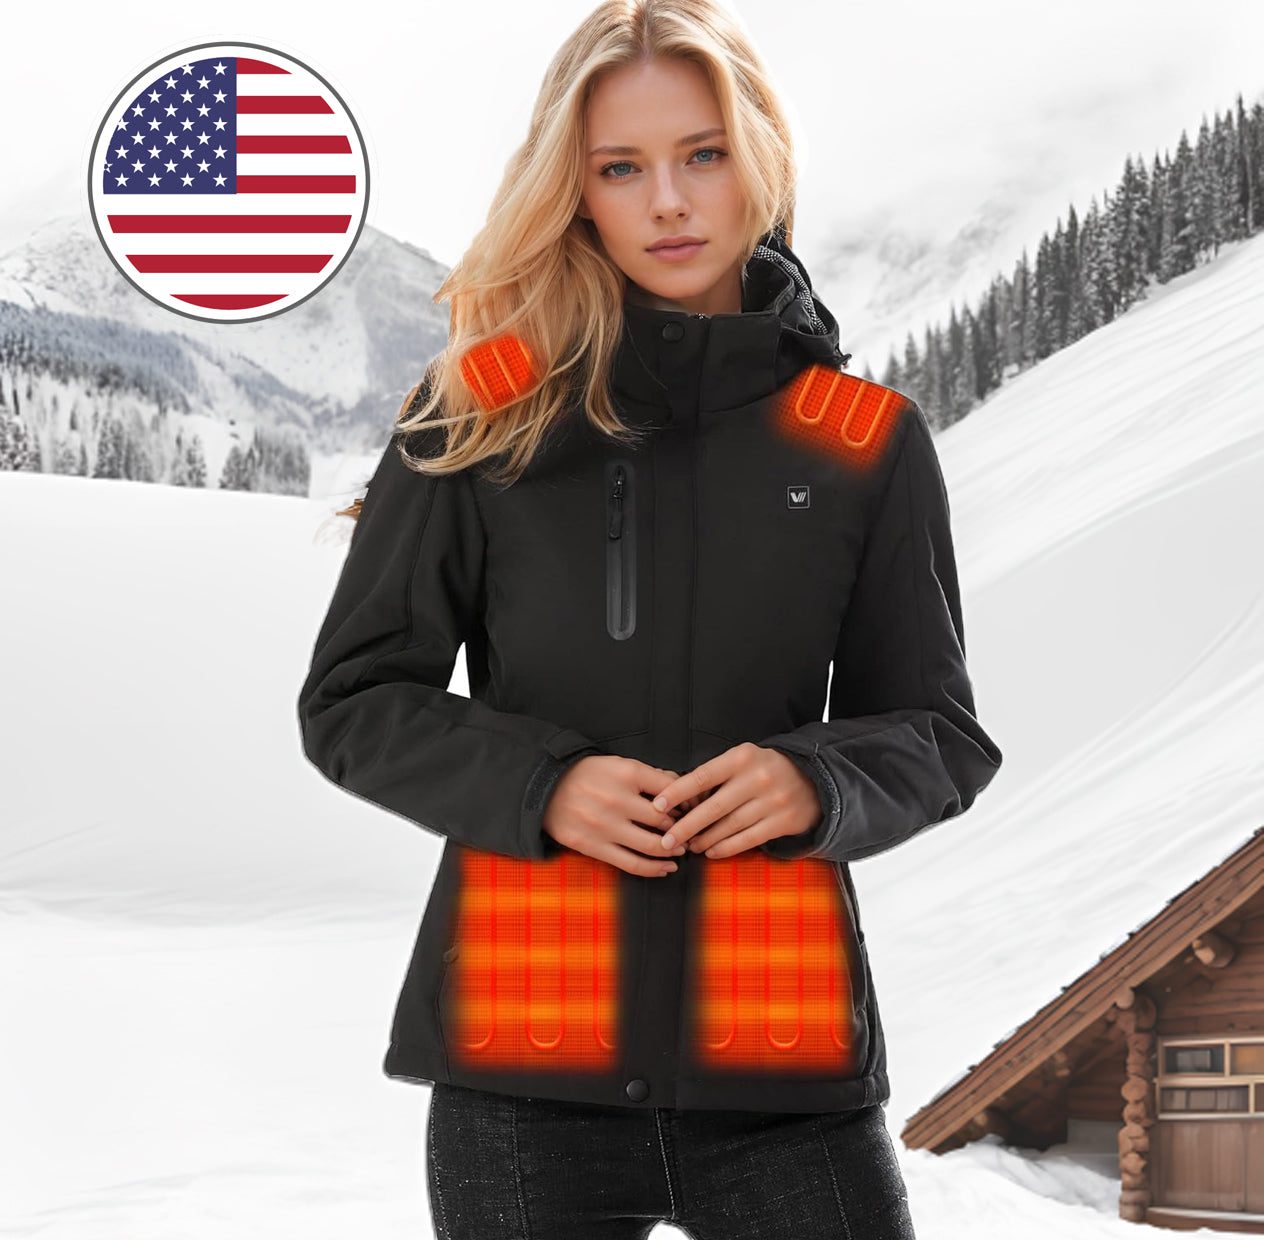 Winter Invincible Women’S Heated Jacket with Battery, Windproof Insulated Coat